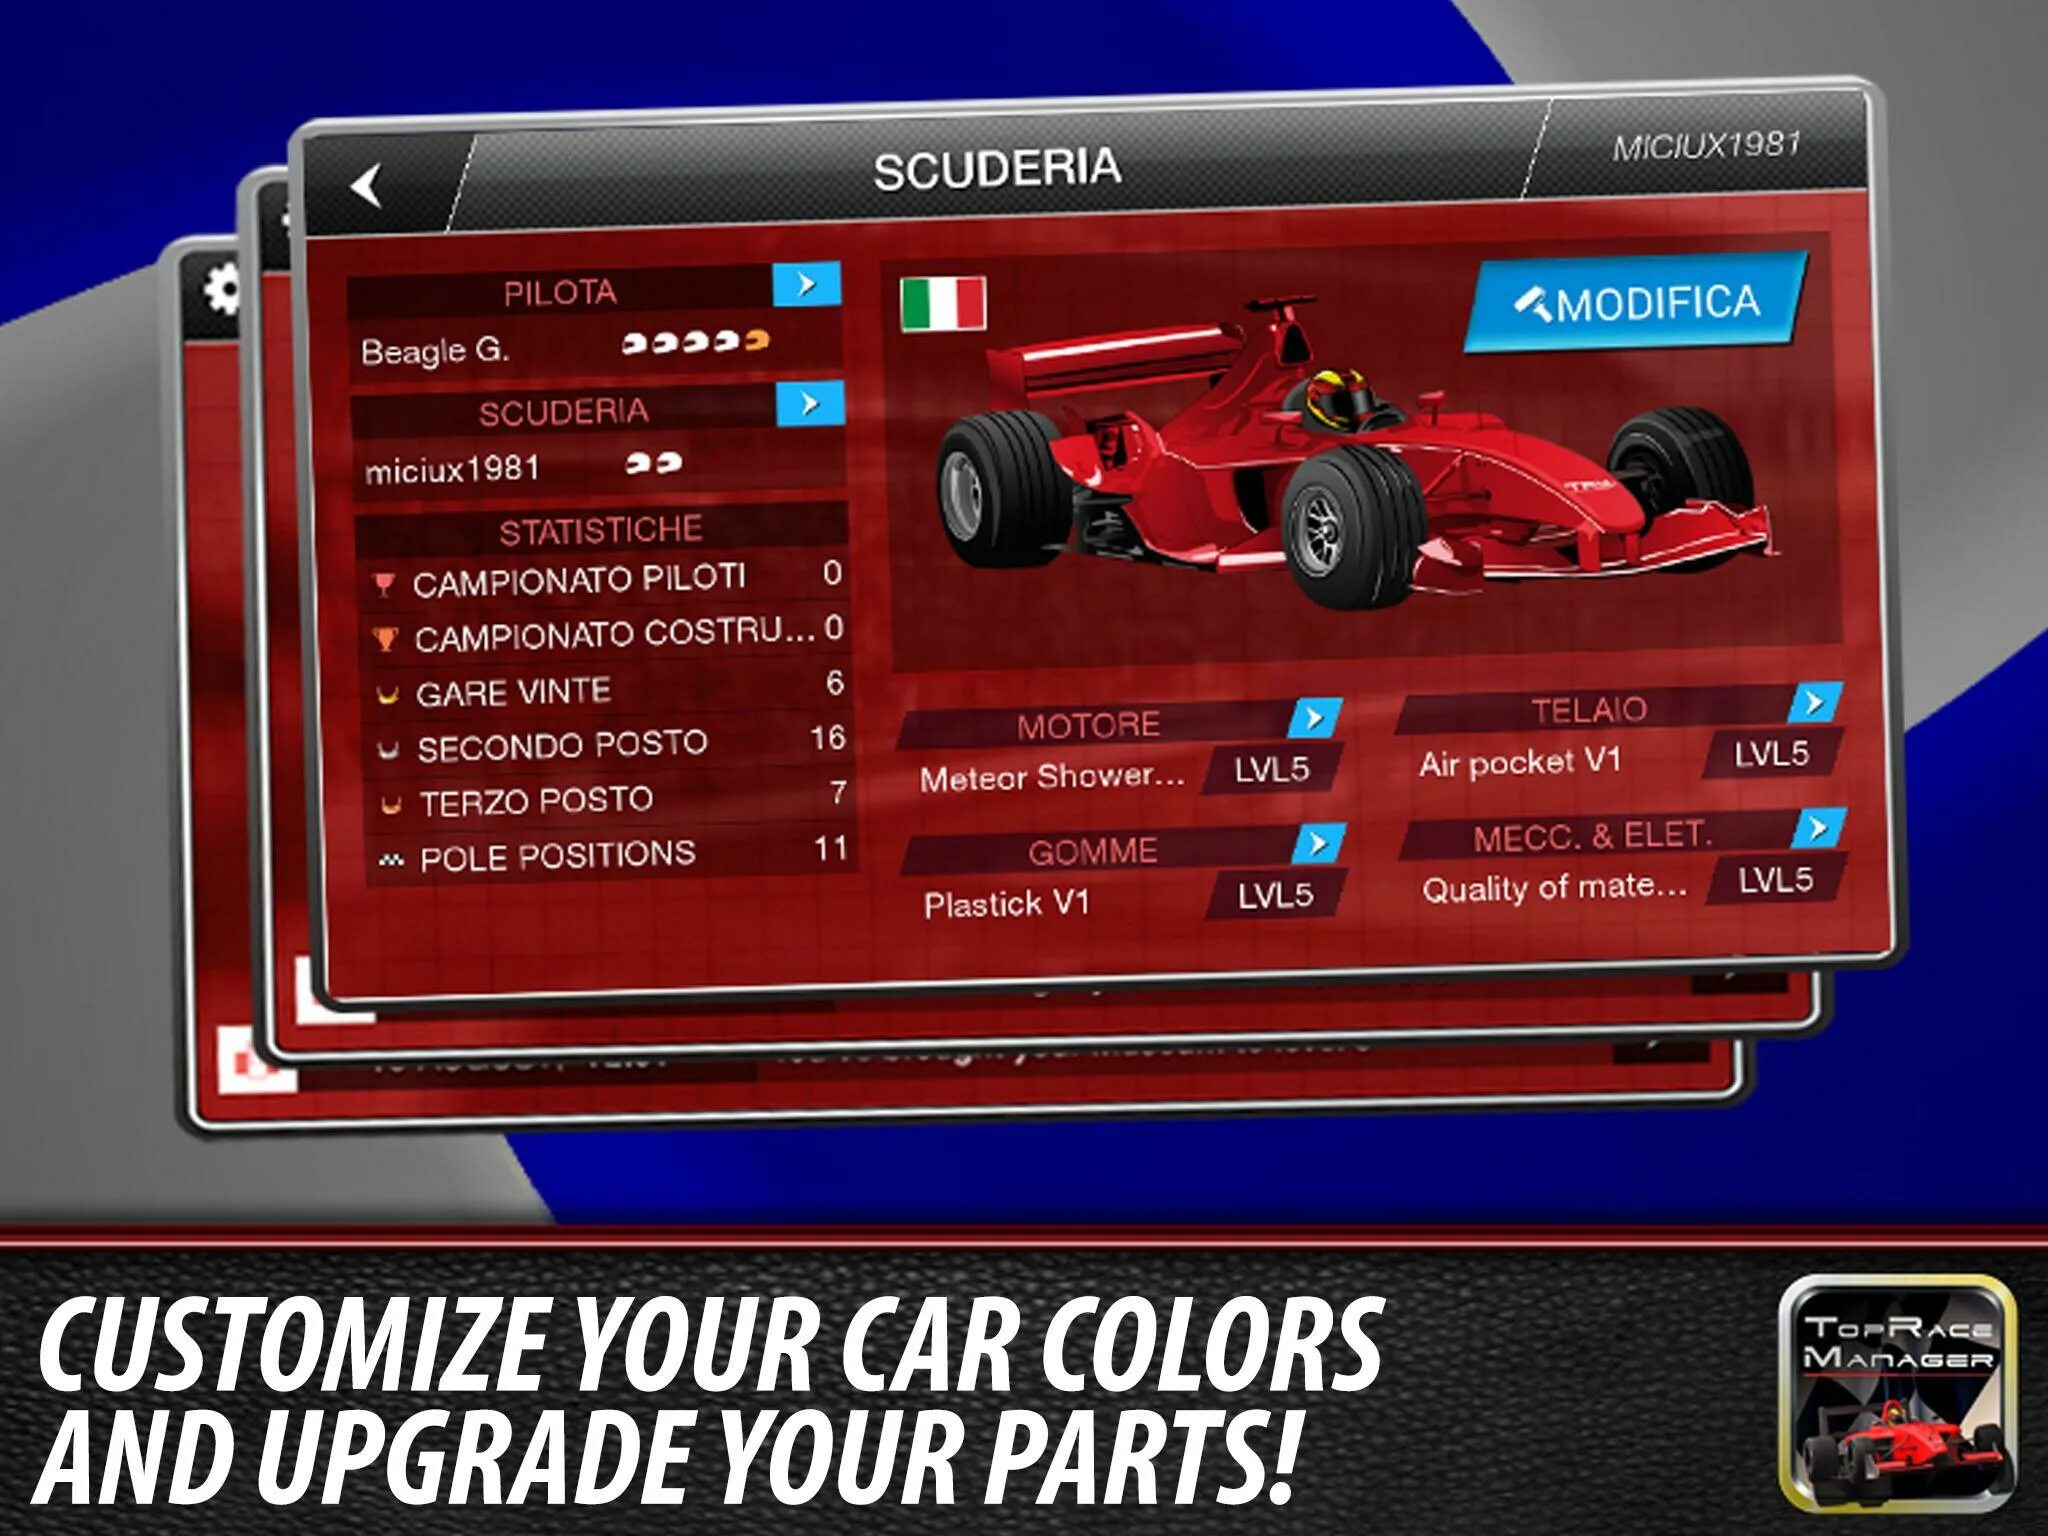 F1 Manager professional. F1 Manager Android. F1 Manager 2000. F1 Manager игры на андроид.